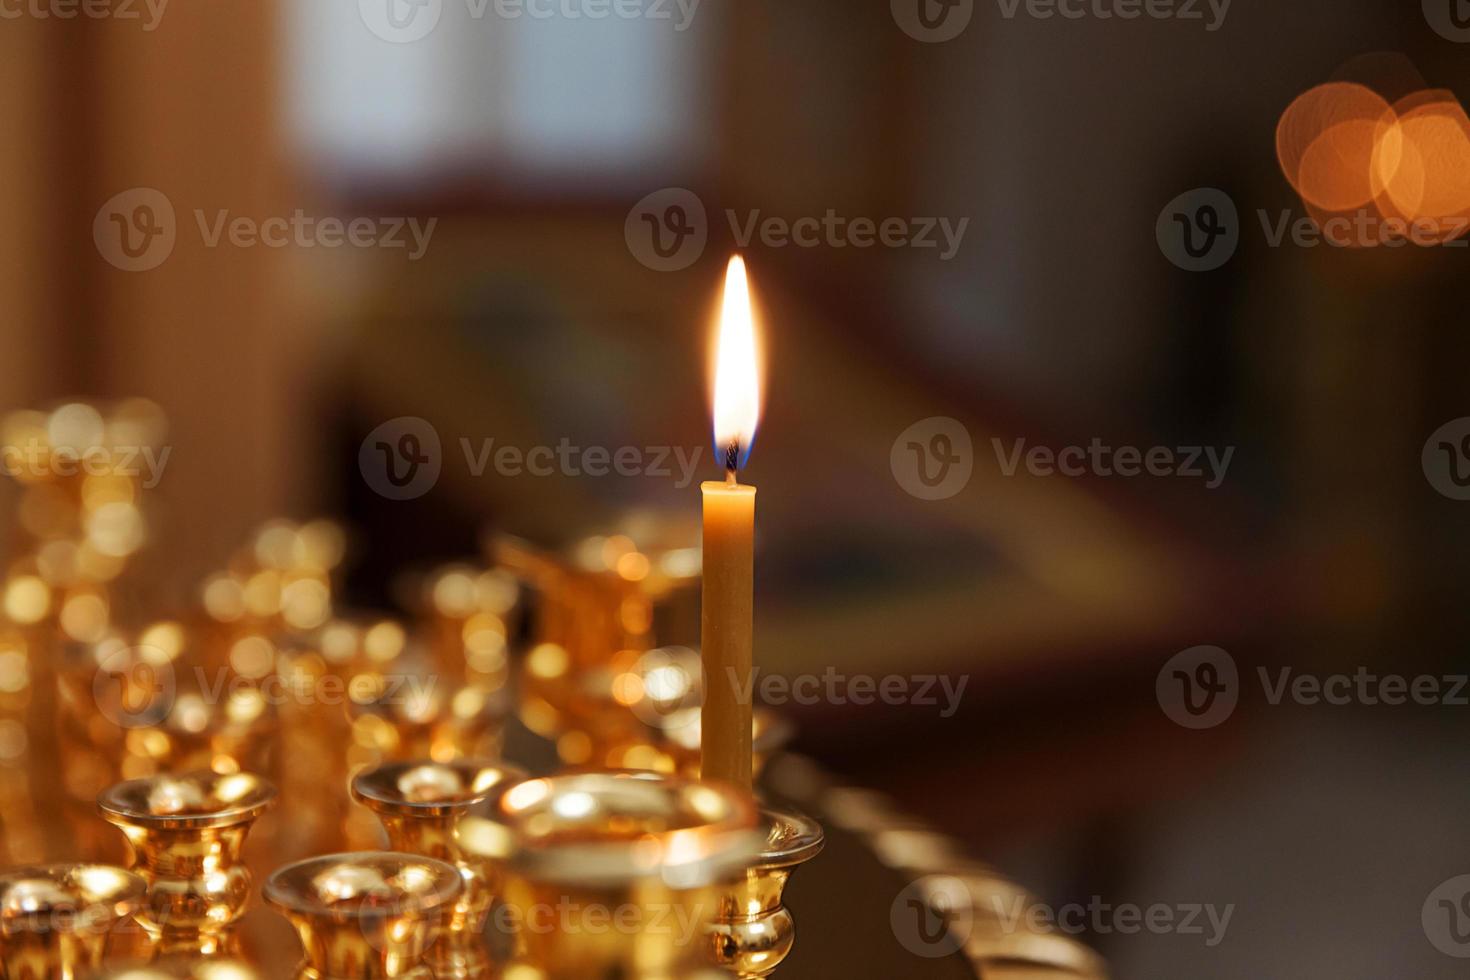 Orthodox Church. Christianity. Festive interior decoration with burning candles and icon in traditional Orthodox Church on Easter Eve or Christmas. Religion faith pray symbol. photo